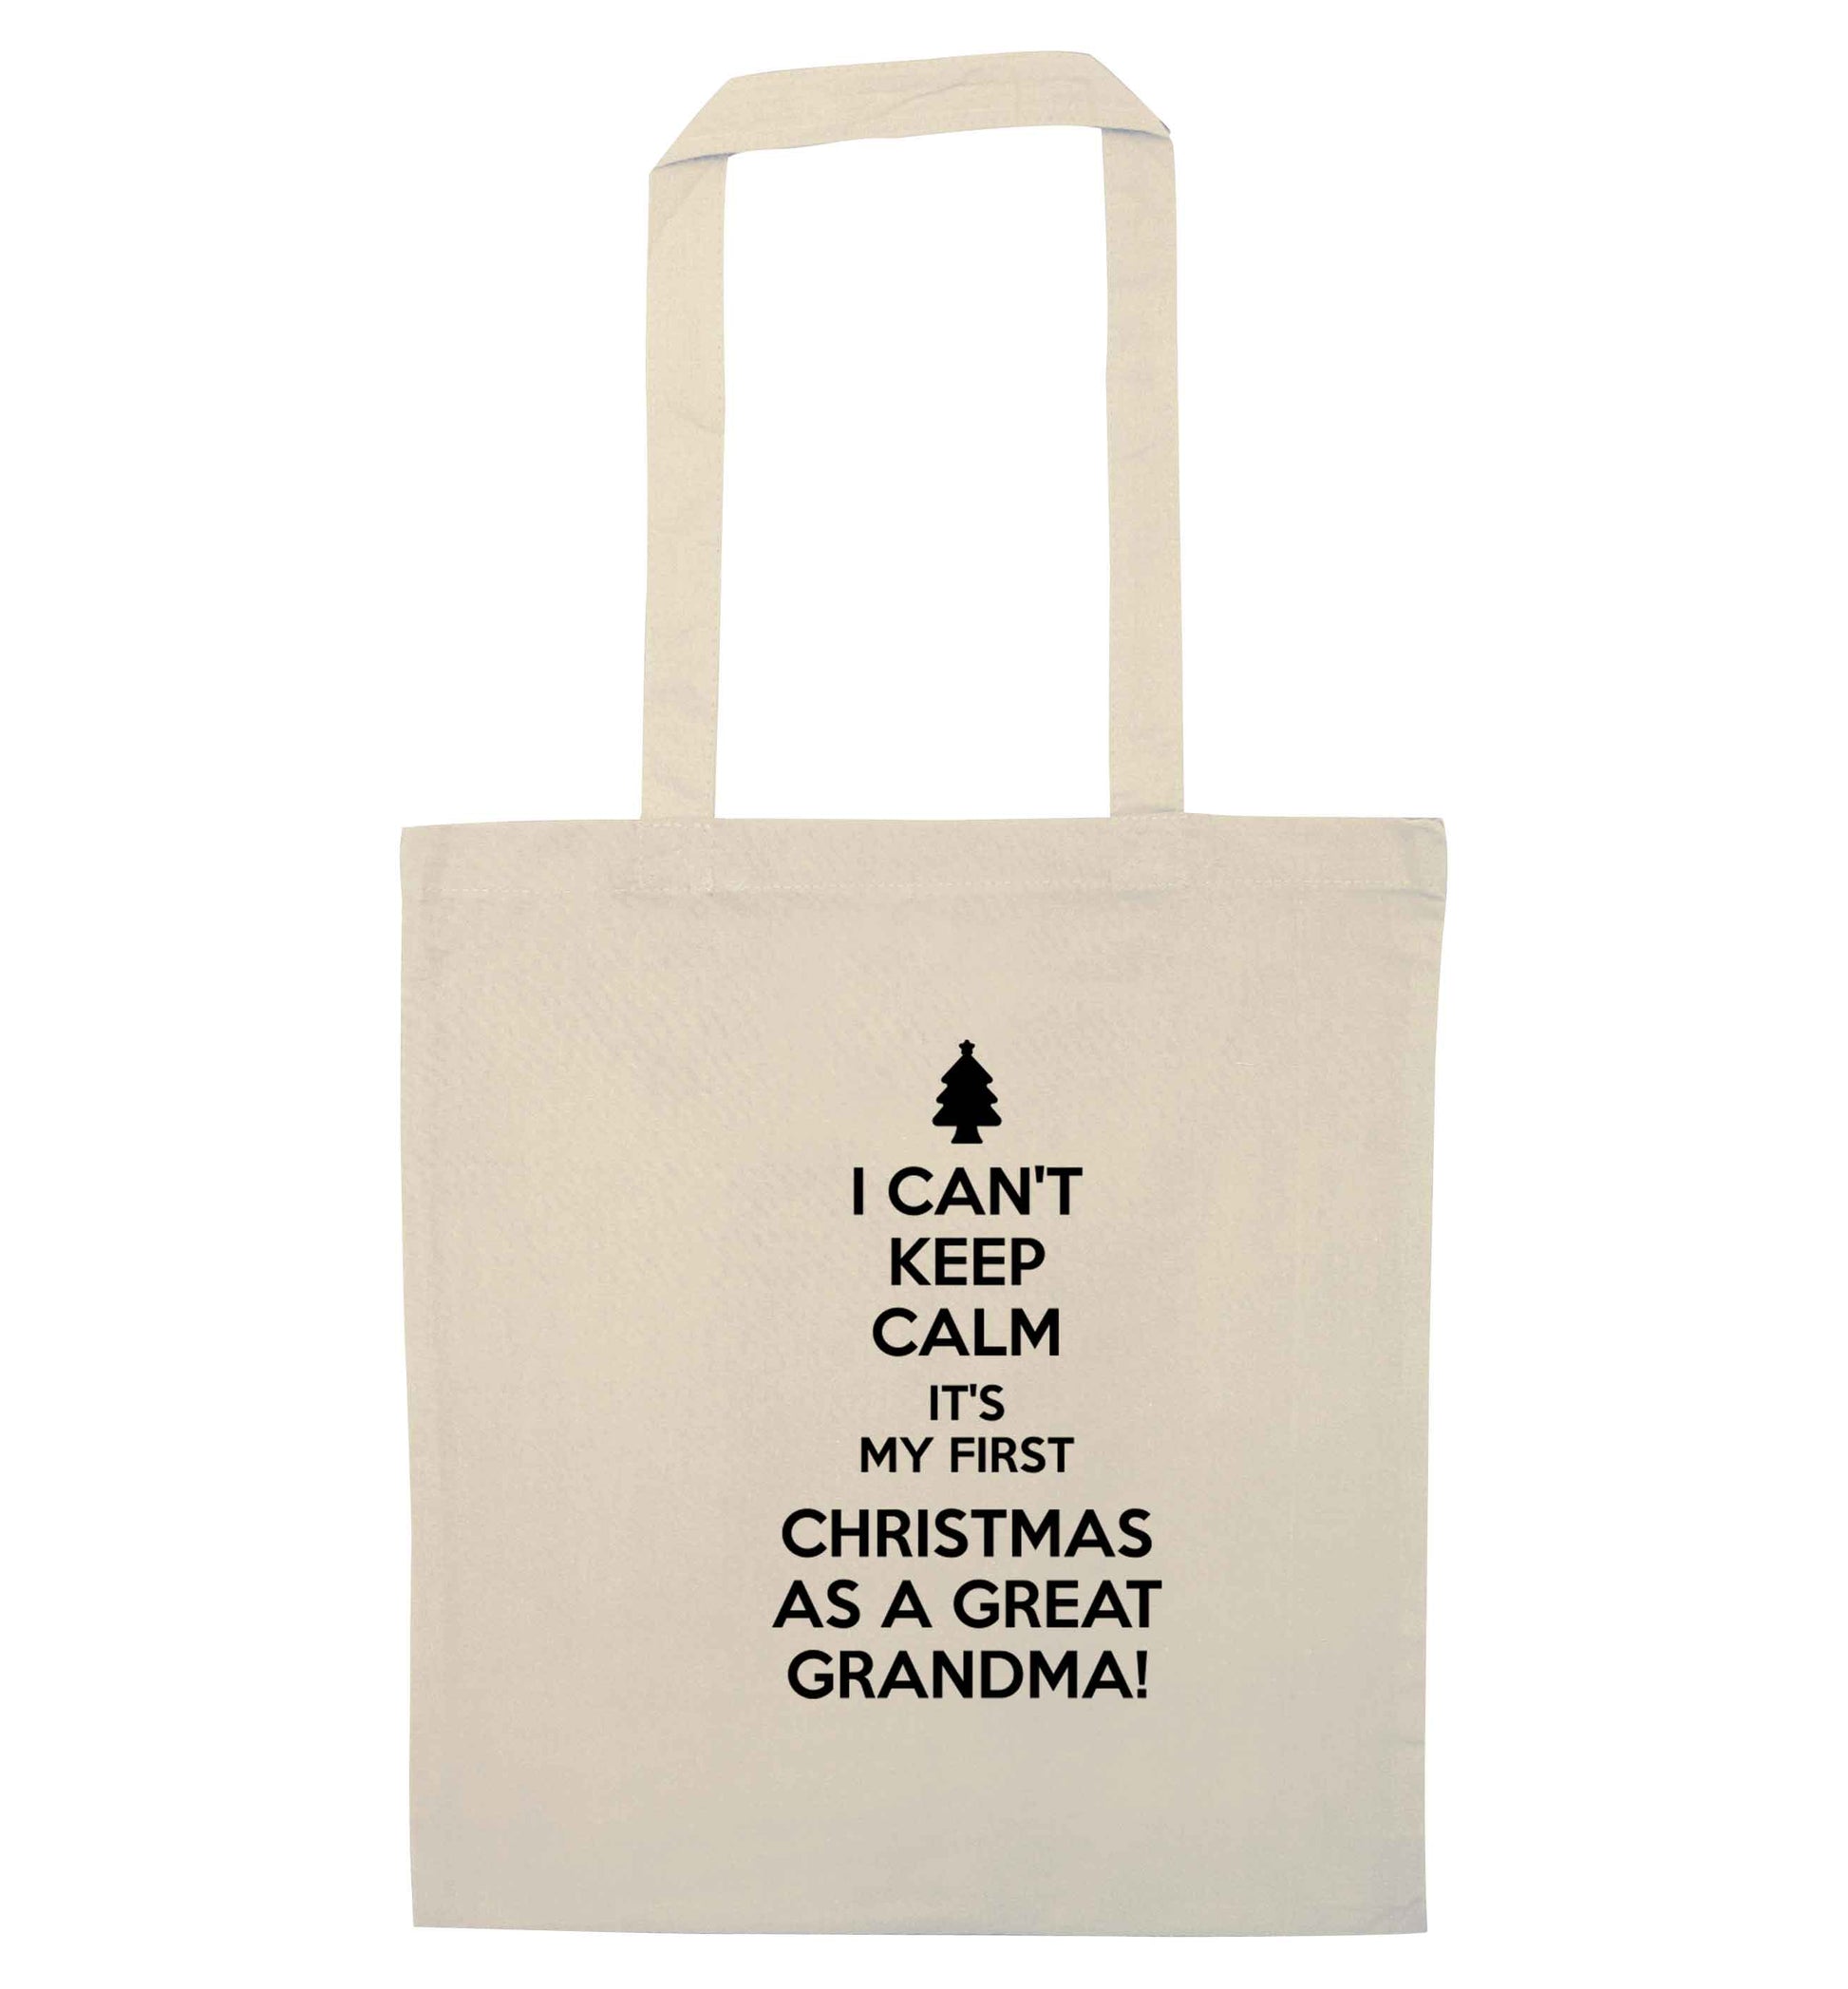 I can't keep calm it's my first Christmas as a great grandma! natural tote bag